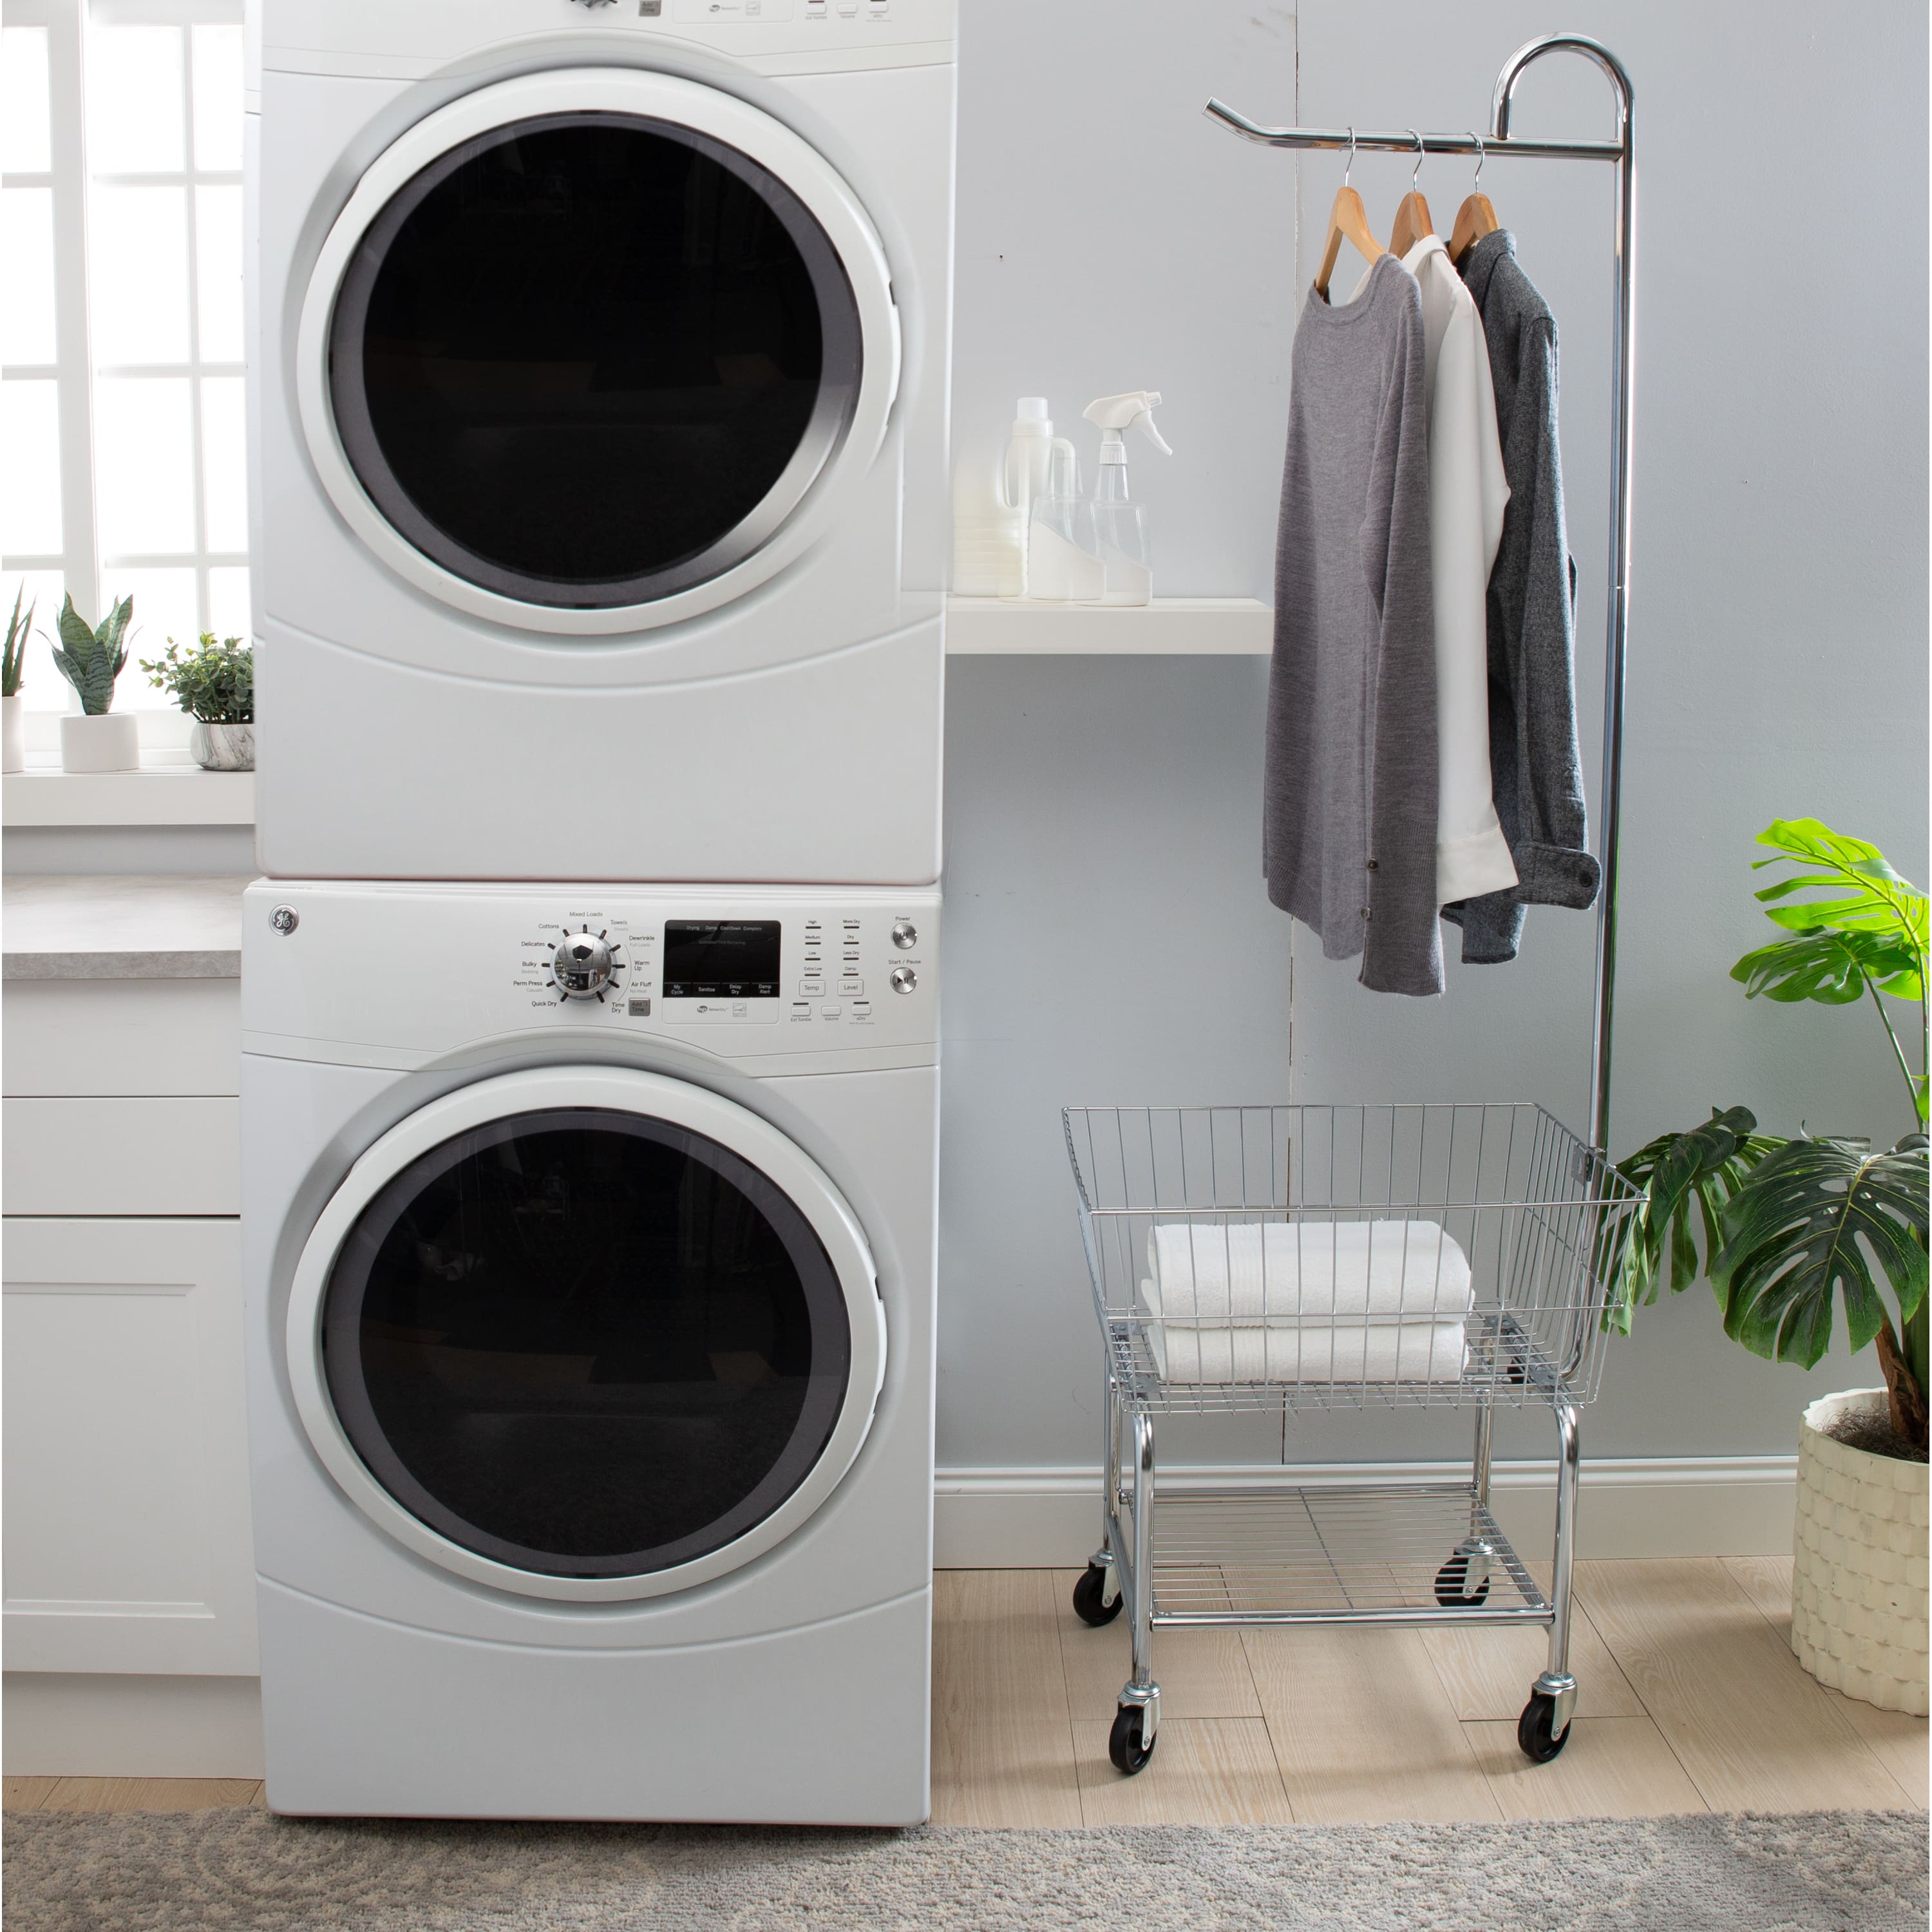 Organize It All Deluxe Laundry Valet